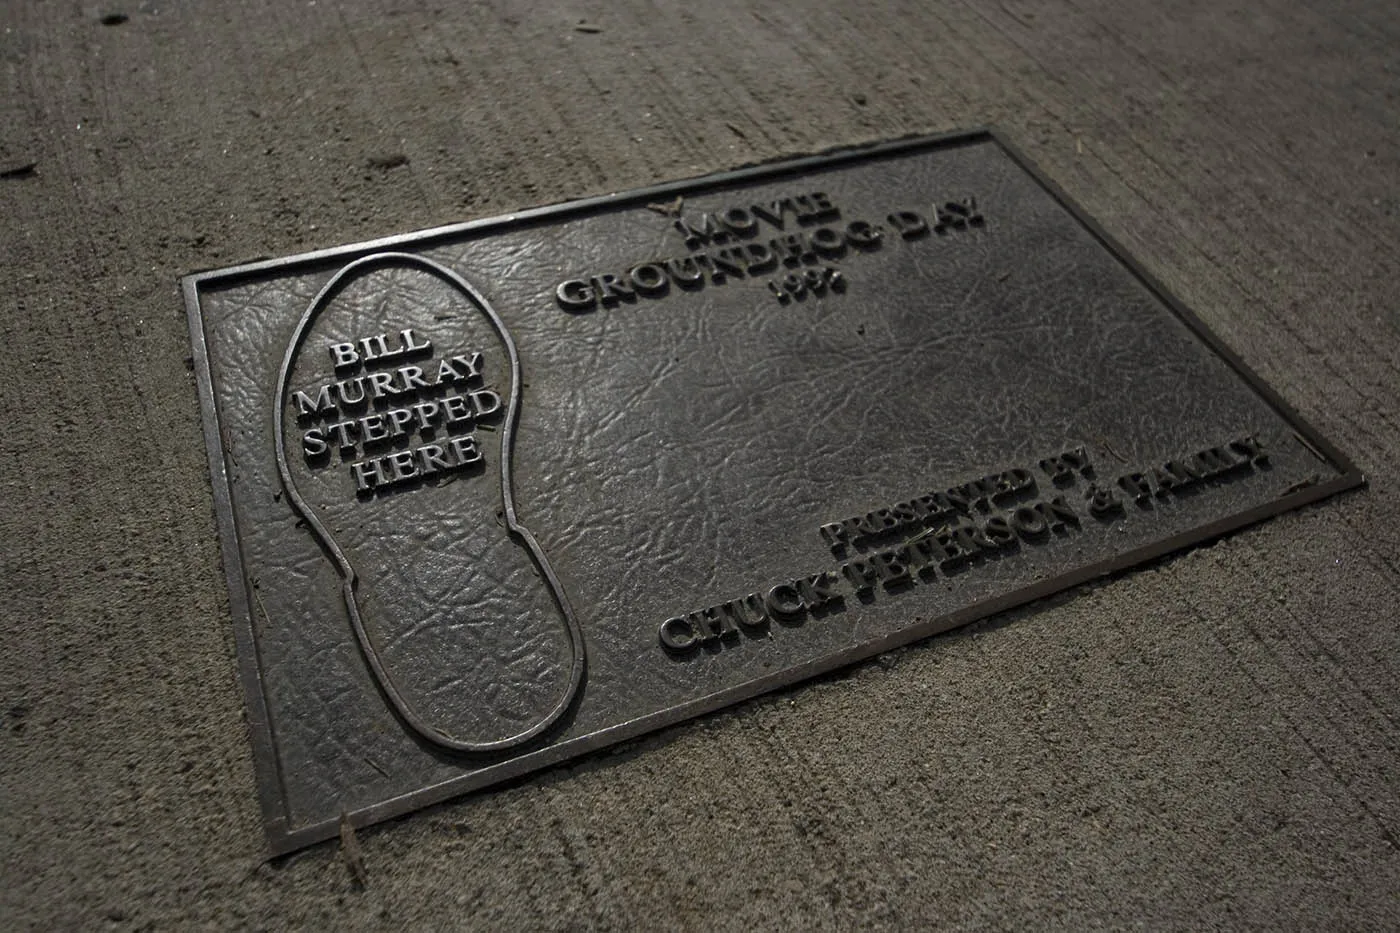 Bill Murray Stepped Here sign - Groundhog Day Movie Filming Locations in Woodstock, Illinois